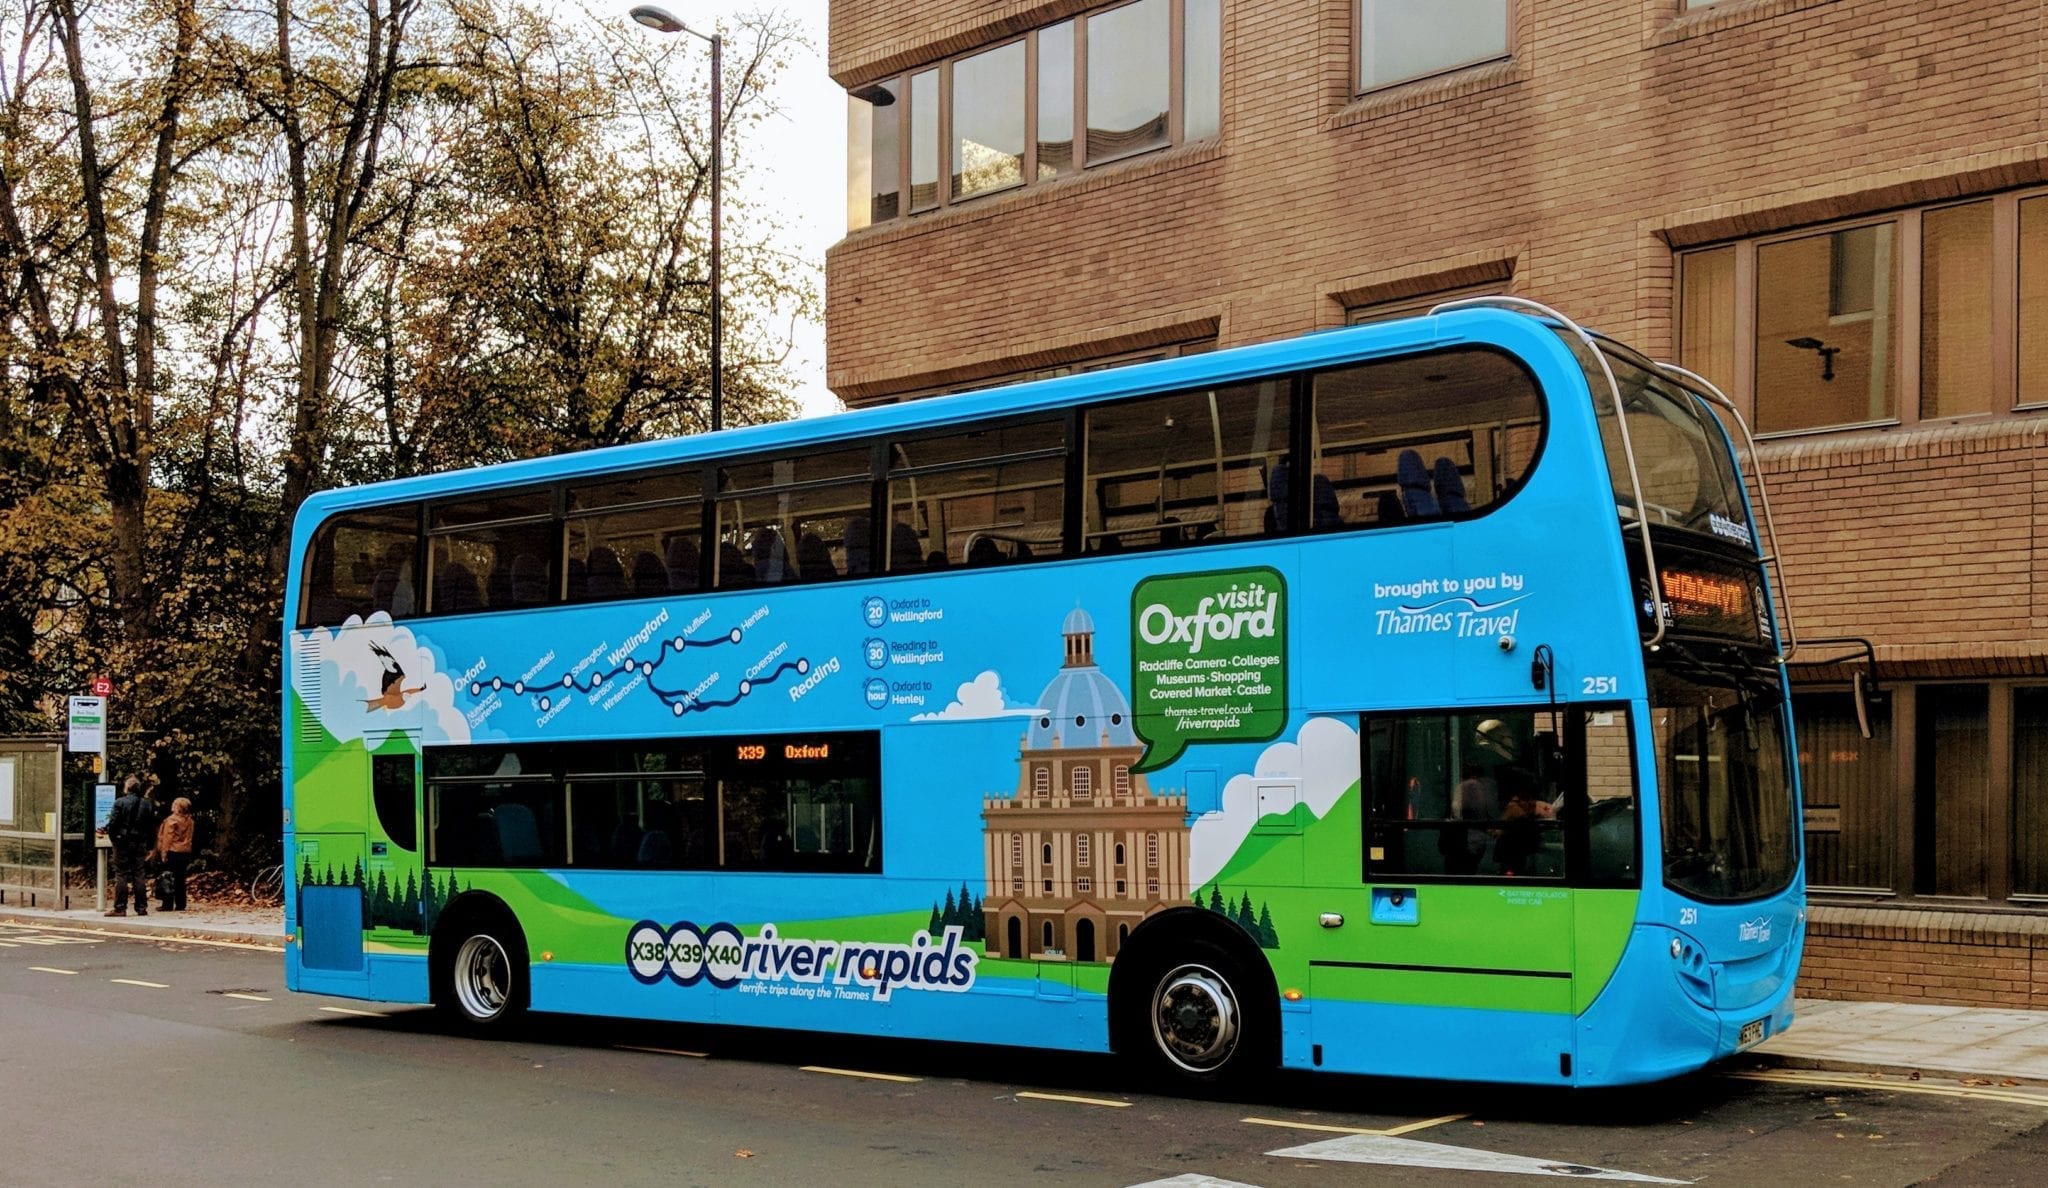 oxford bus company travel shop opening times